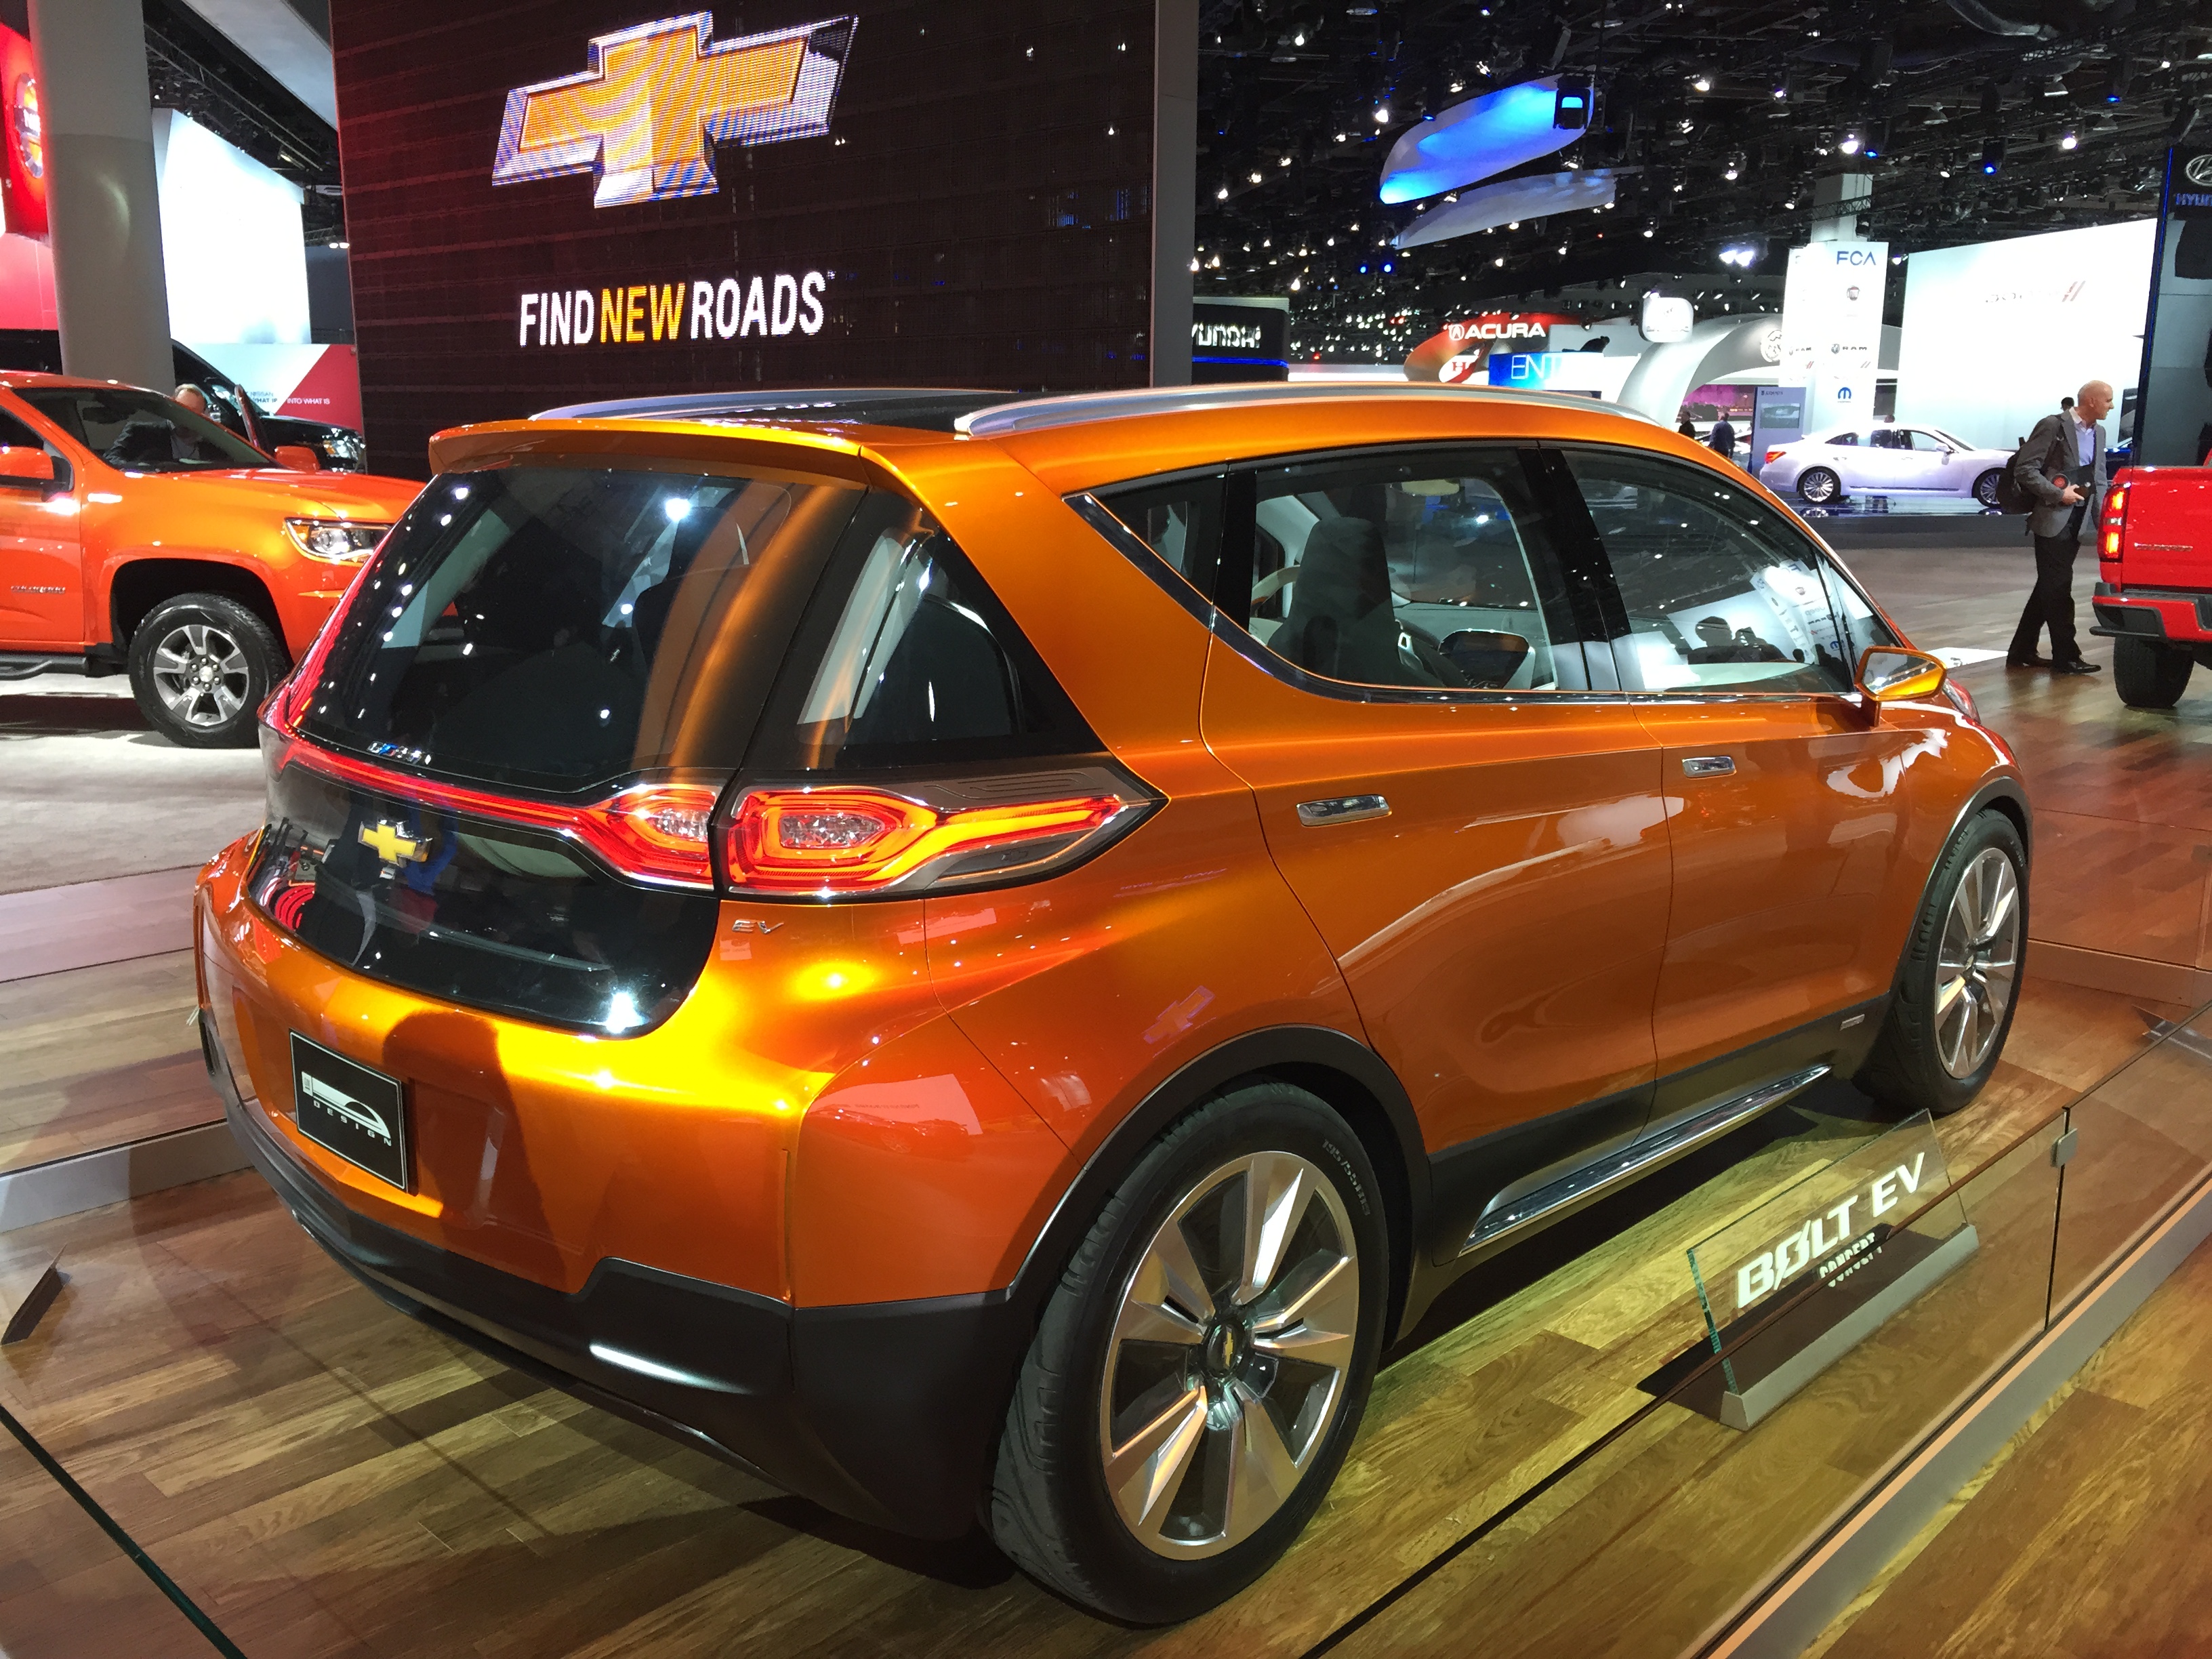 Chevy Bolt to be built! It’s official. – The EV-angelist